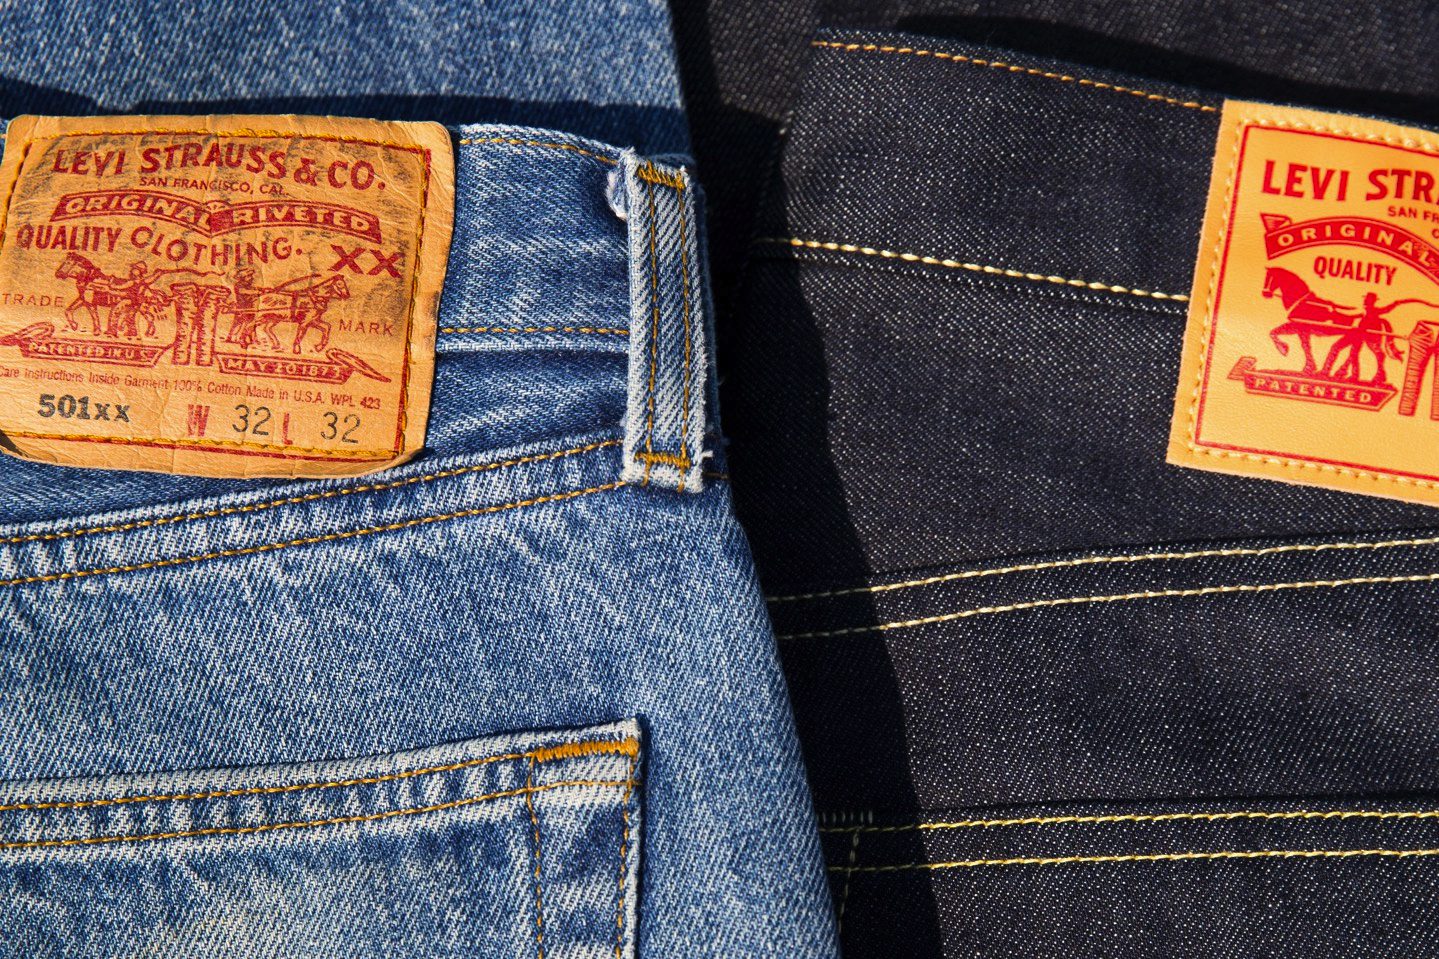 Levi Strauss share price rebounds on earnings report